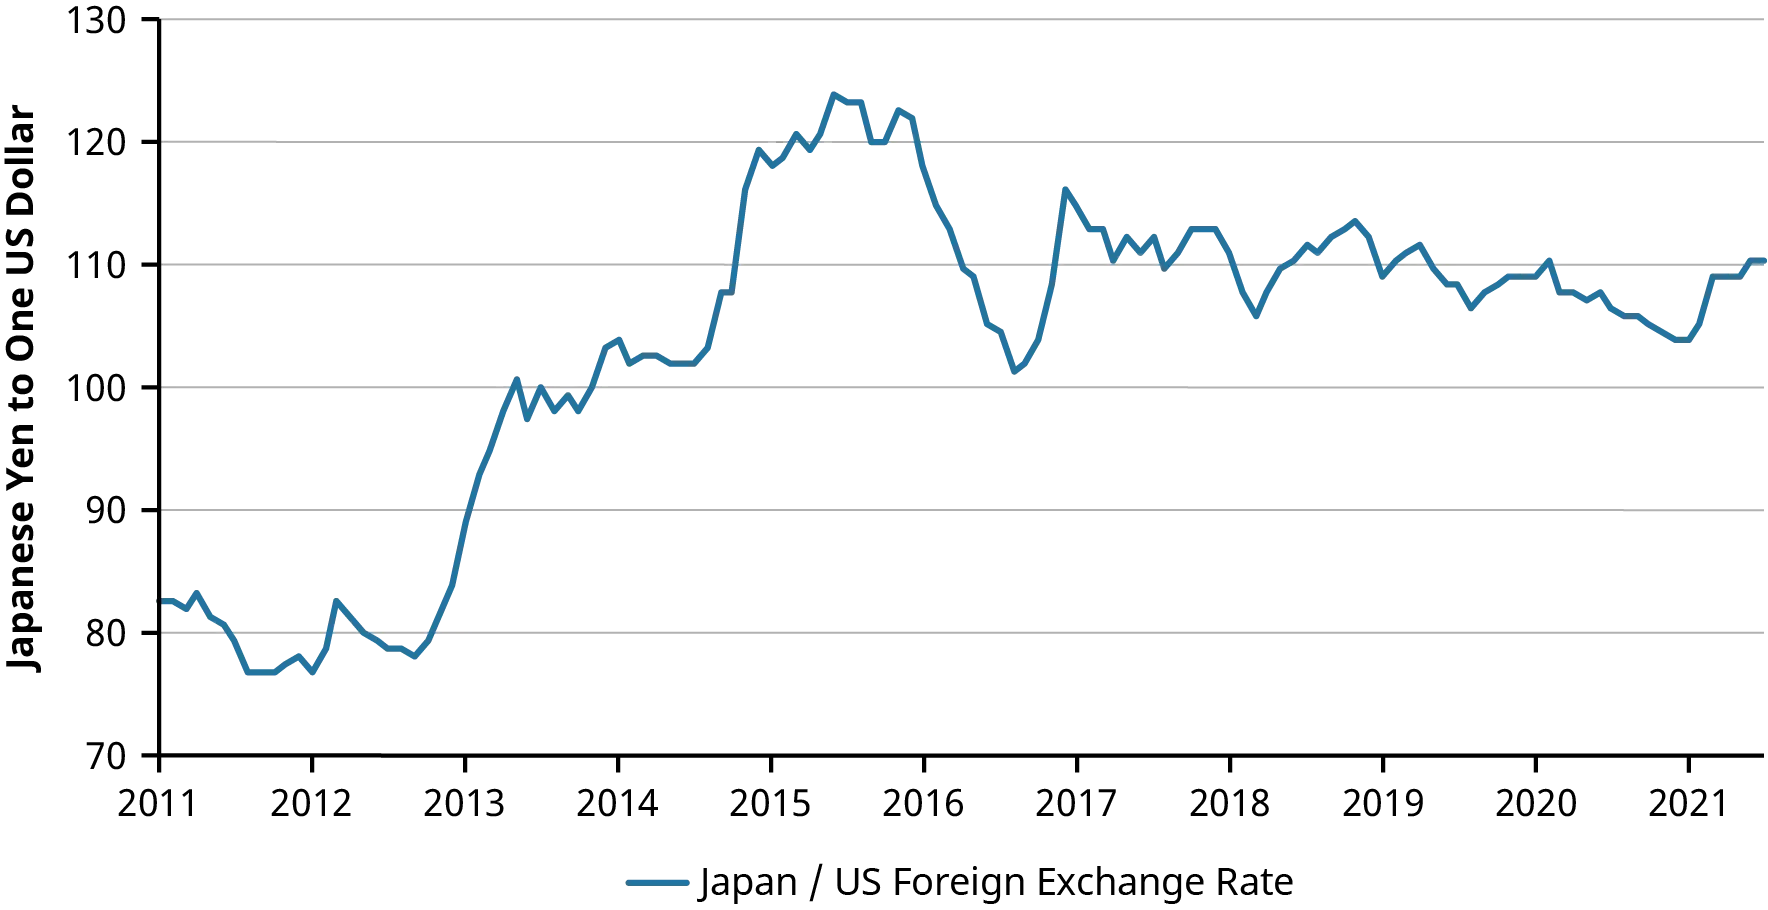 A line graph shows the exchange rate for Japanese Yen to One U.S. Dollar from 2010 through 2021. The low point of the graph occurs in 2012, when the exchange rate was just under 80 Yen to 1 U.S. Dollar. The high point of the graph occurs in 2015, when the exchange rate was just over 120 Yen to 1 U.S. dollar. In 2021, the exchange rate was 110 Yen to 1 U.S. dollar.